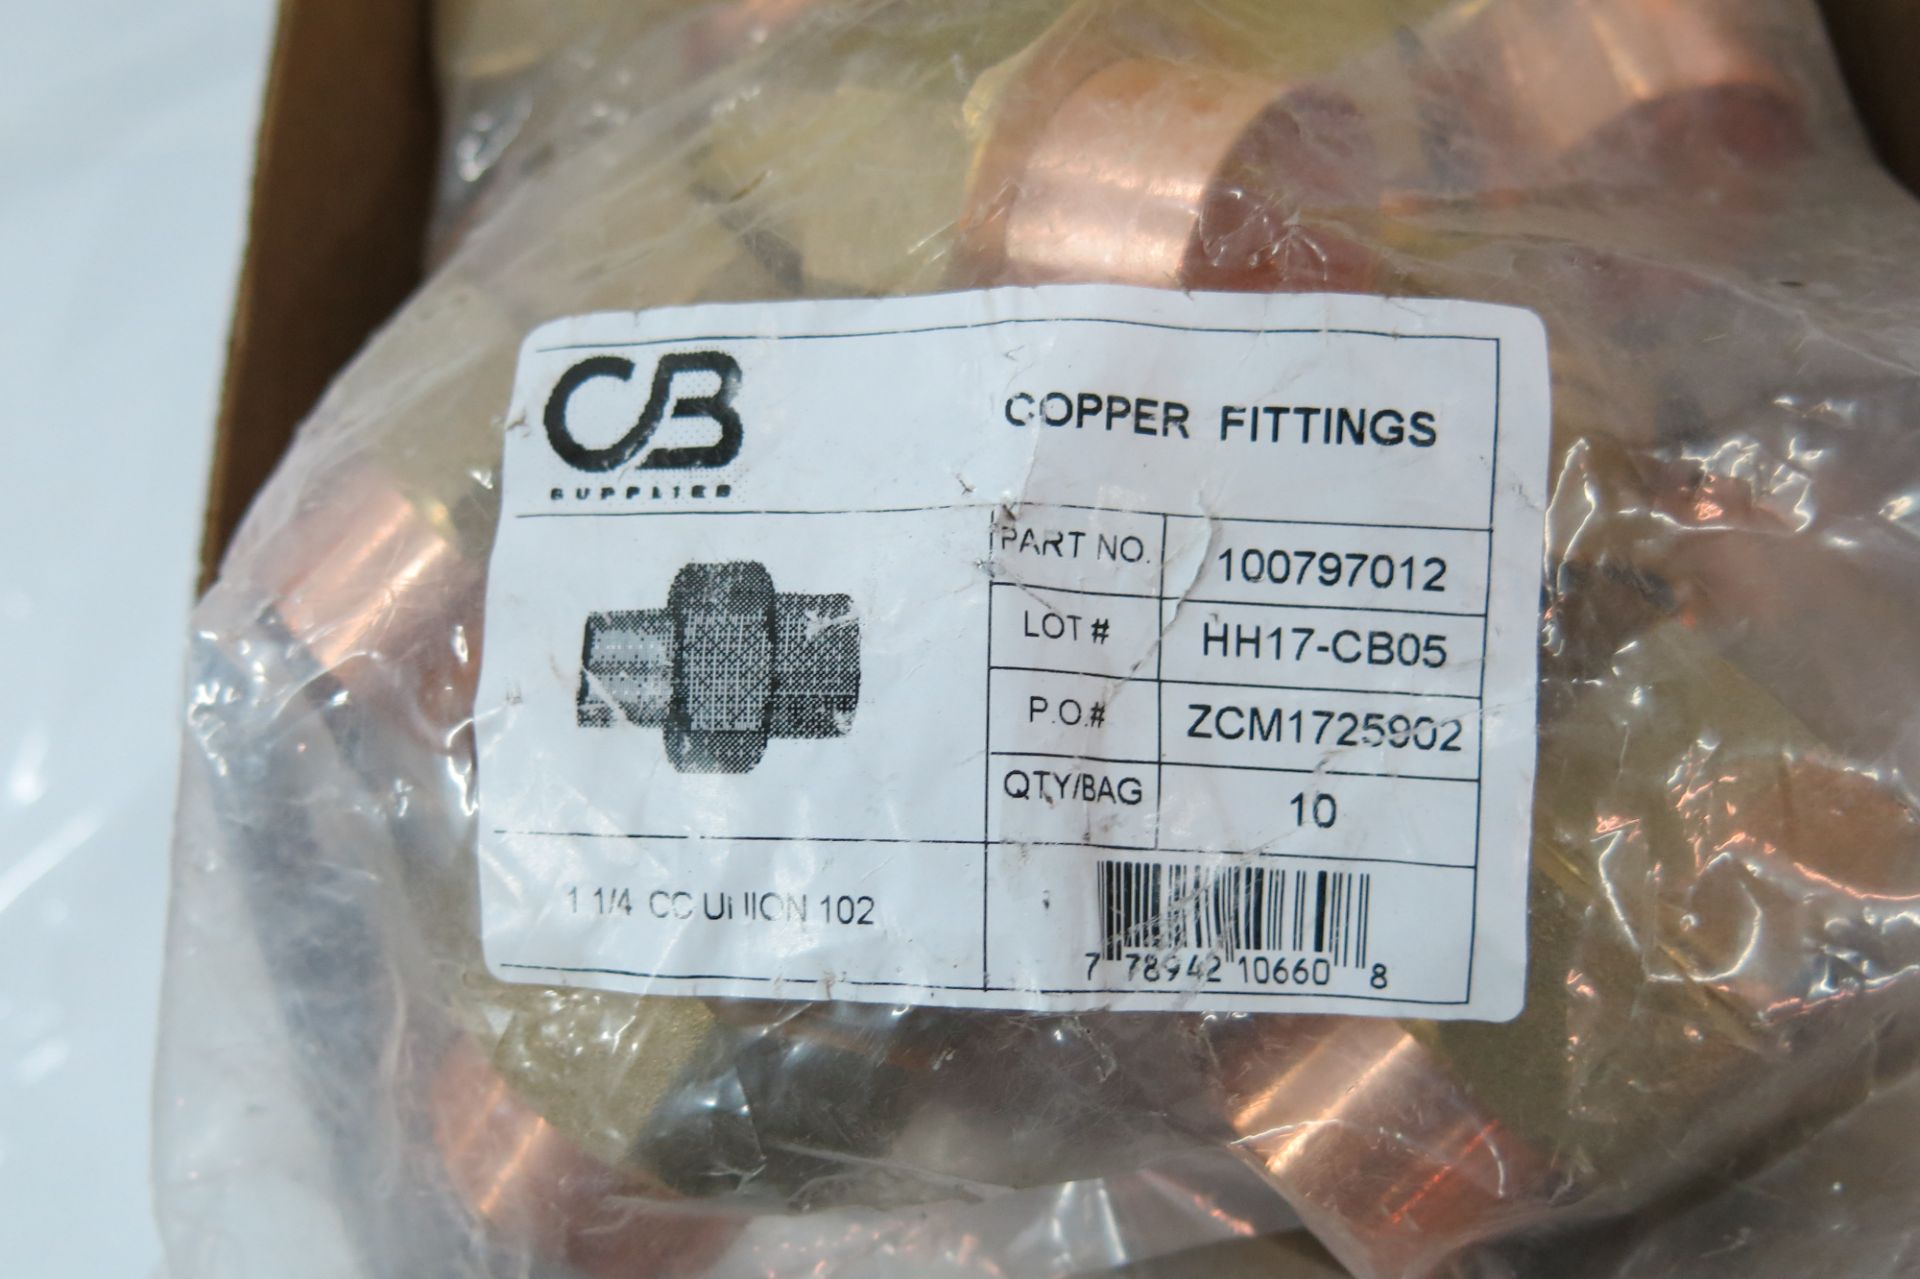 LOT OF CB SUPPLIES, 100797012, 1 1/4", COPPER UNION 102 - NEW (LOCATED IN SCARBOROUGH) - Image 2 of 2